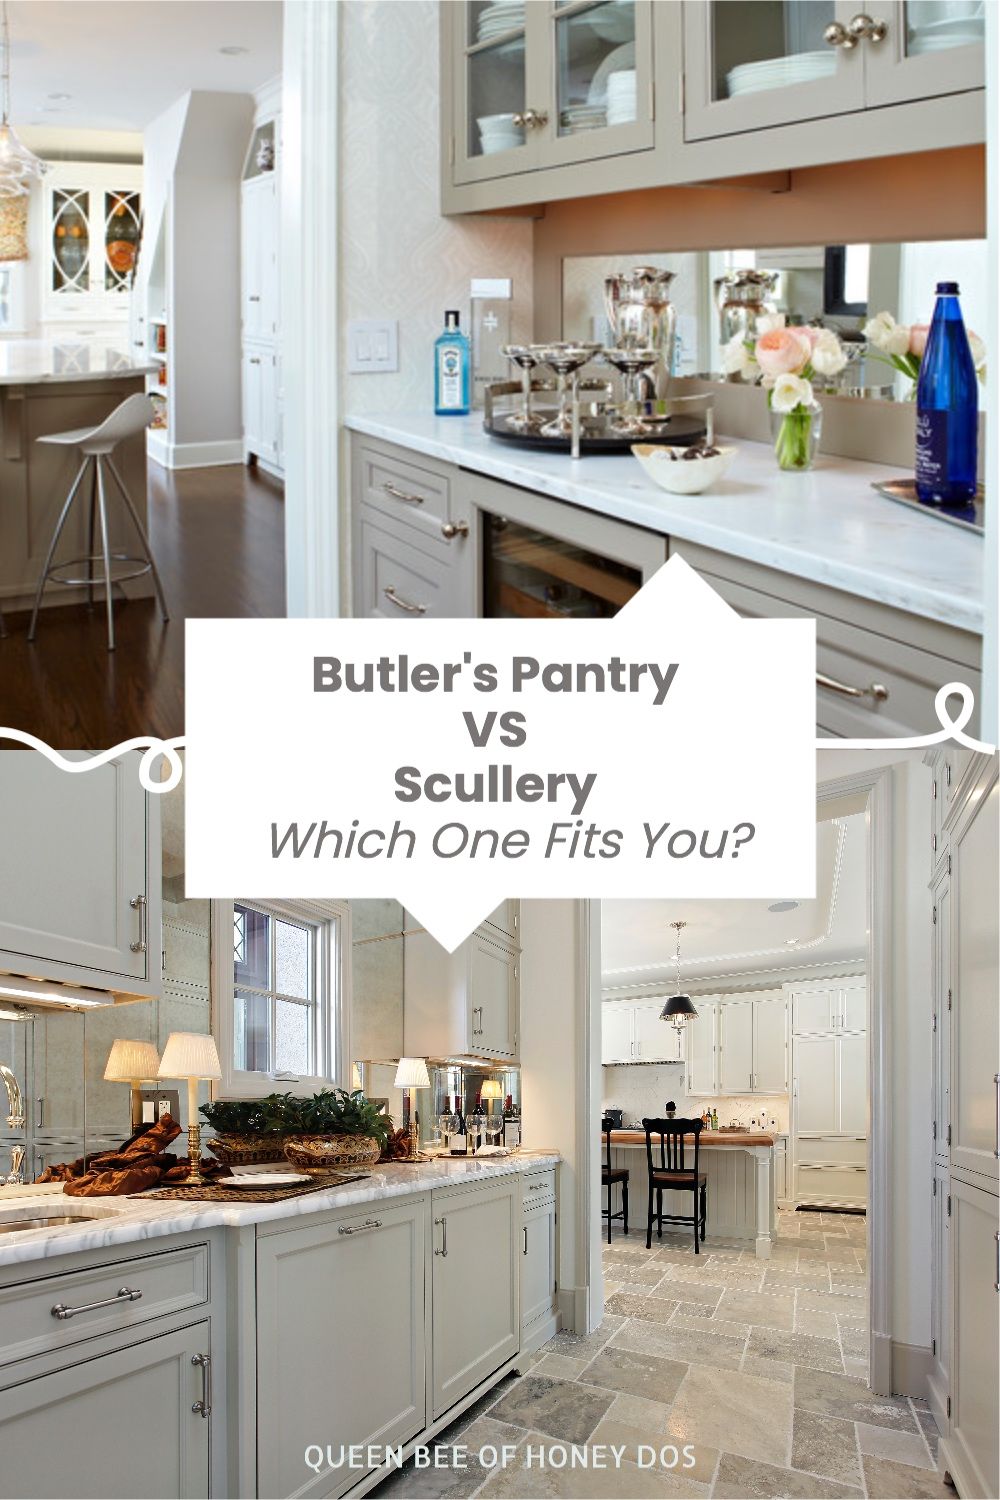 Butler's Pantry VS Scullery - What's the Difference?